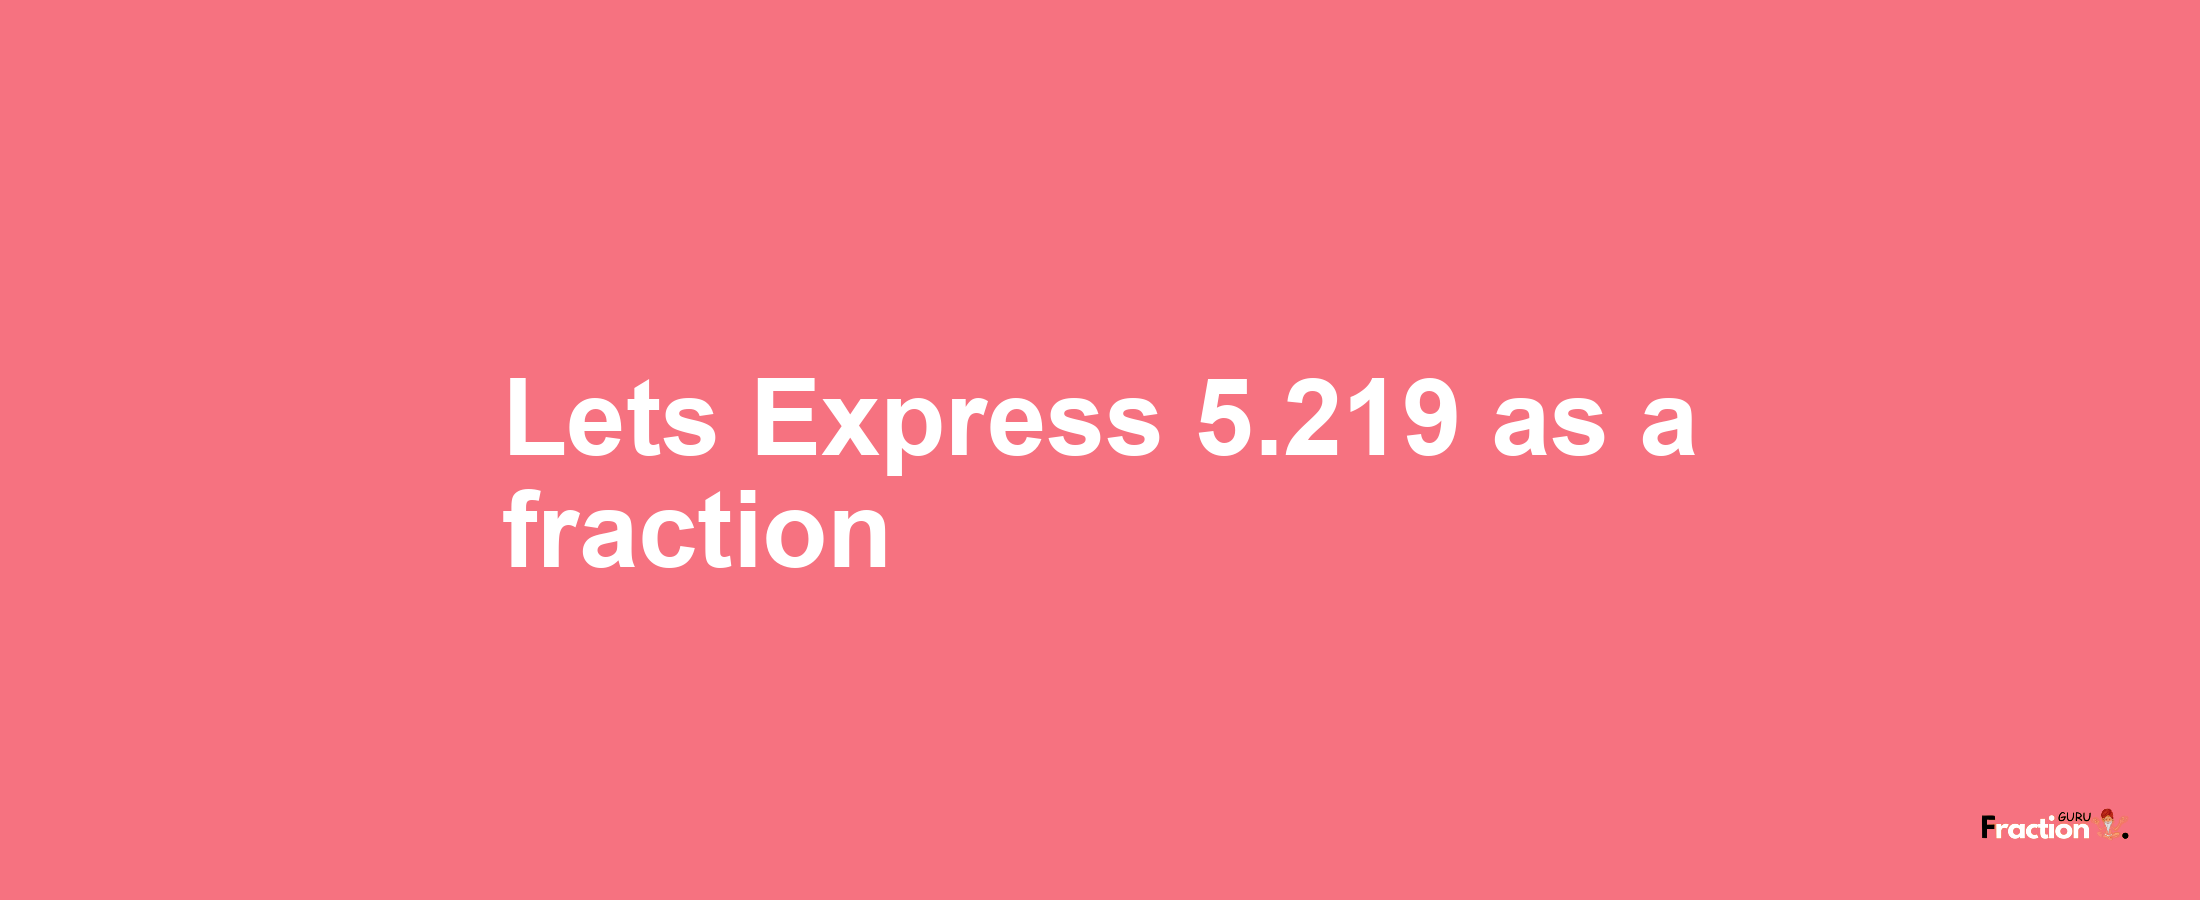 Lets Express 5.219 as afraction